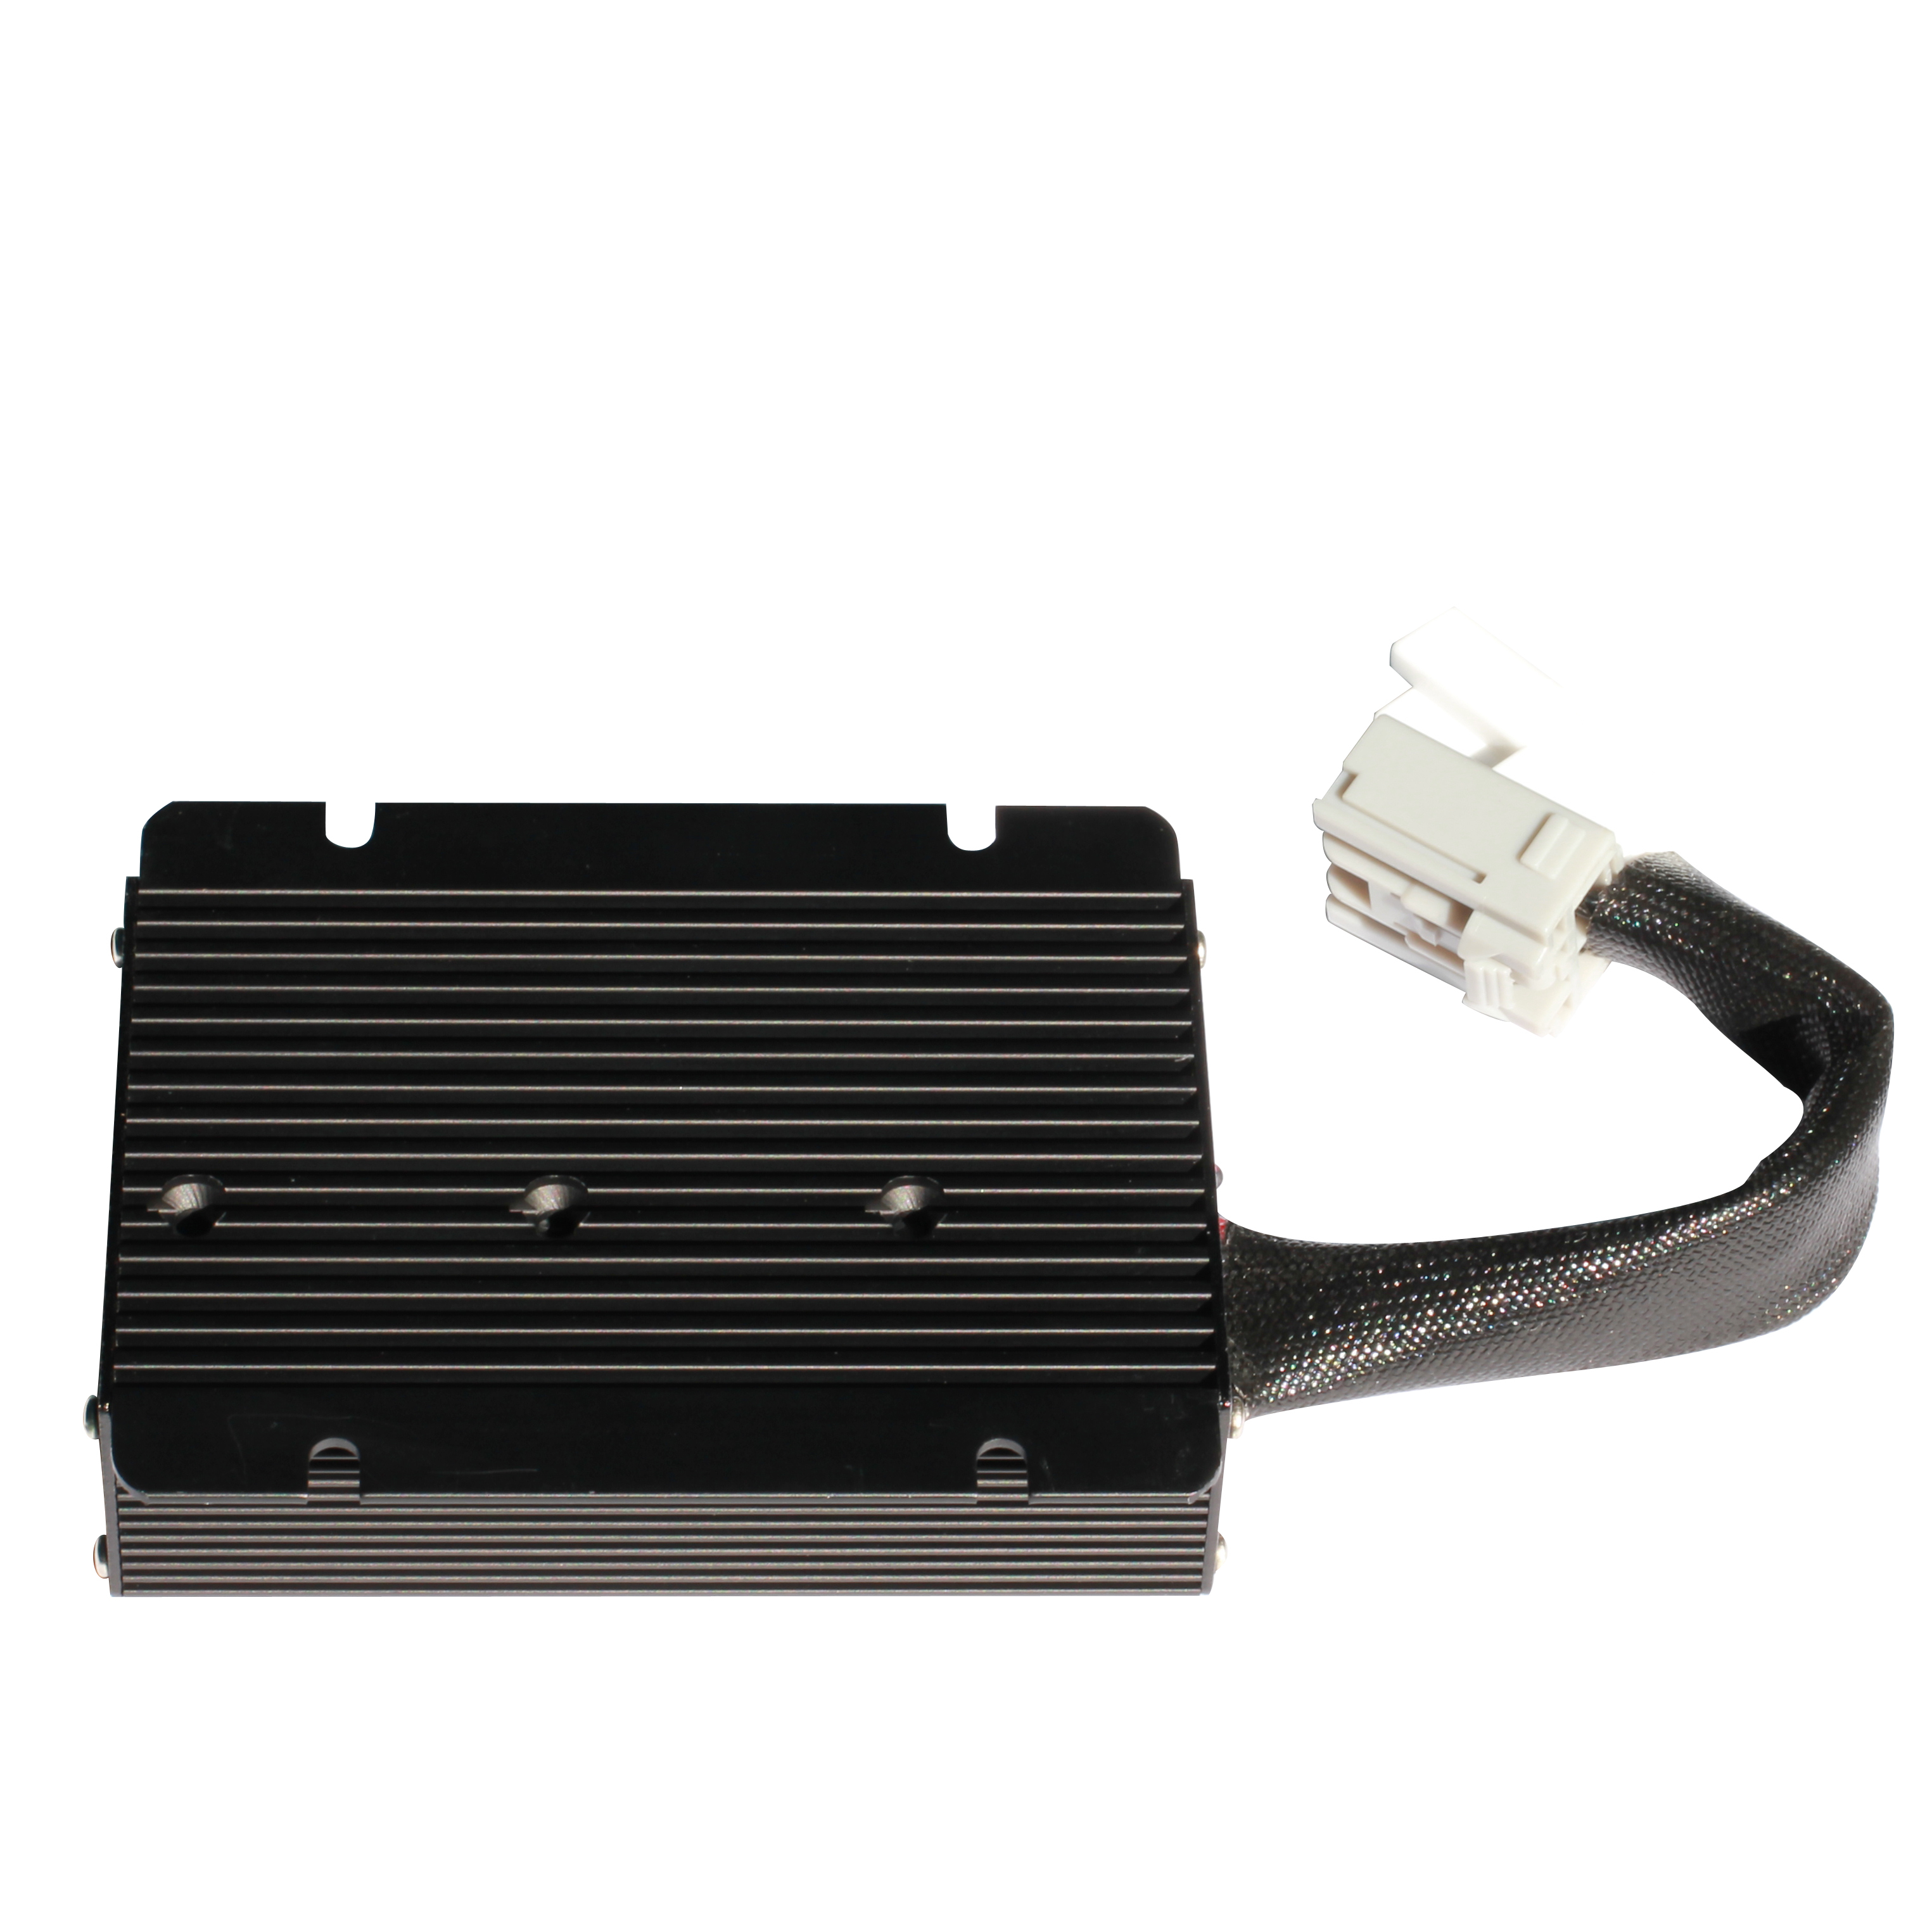 Customized 150W power inverter for car refitting with customized connectors